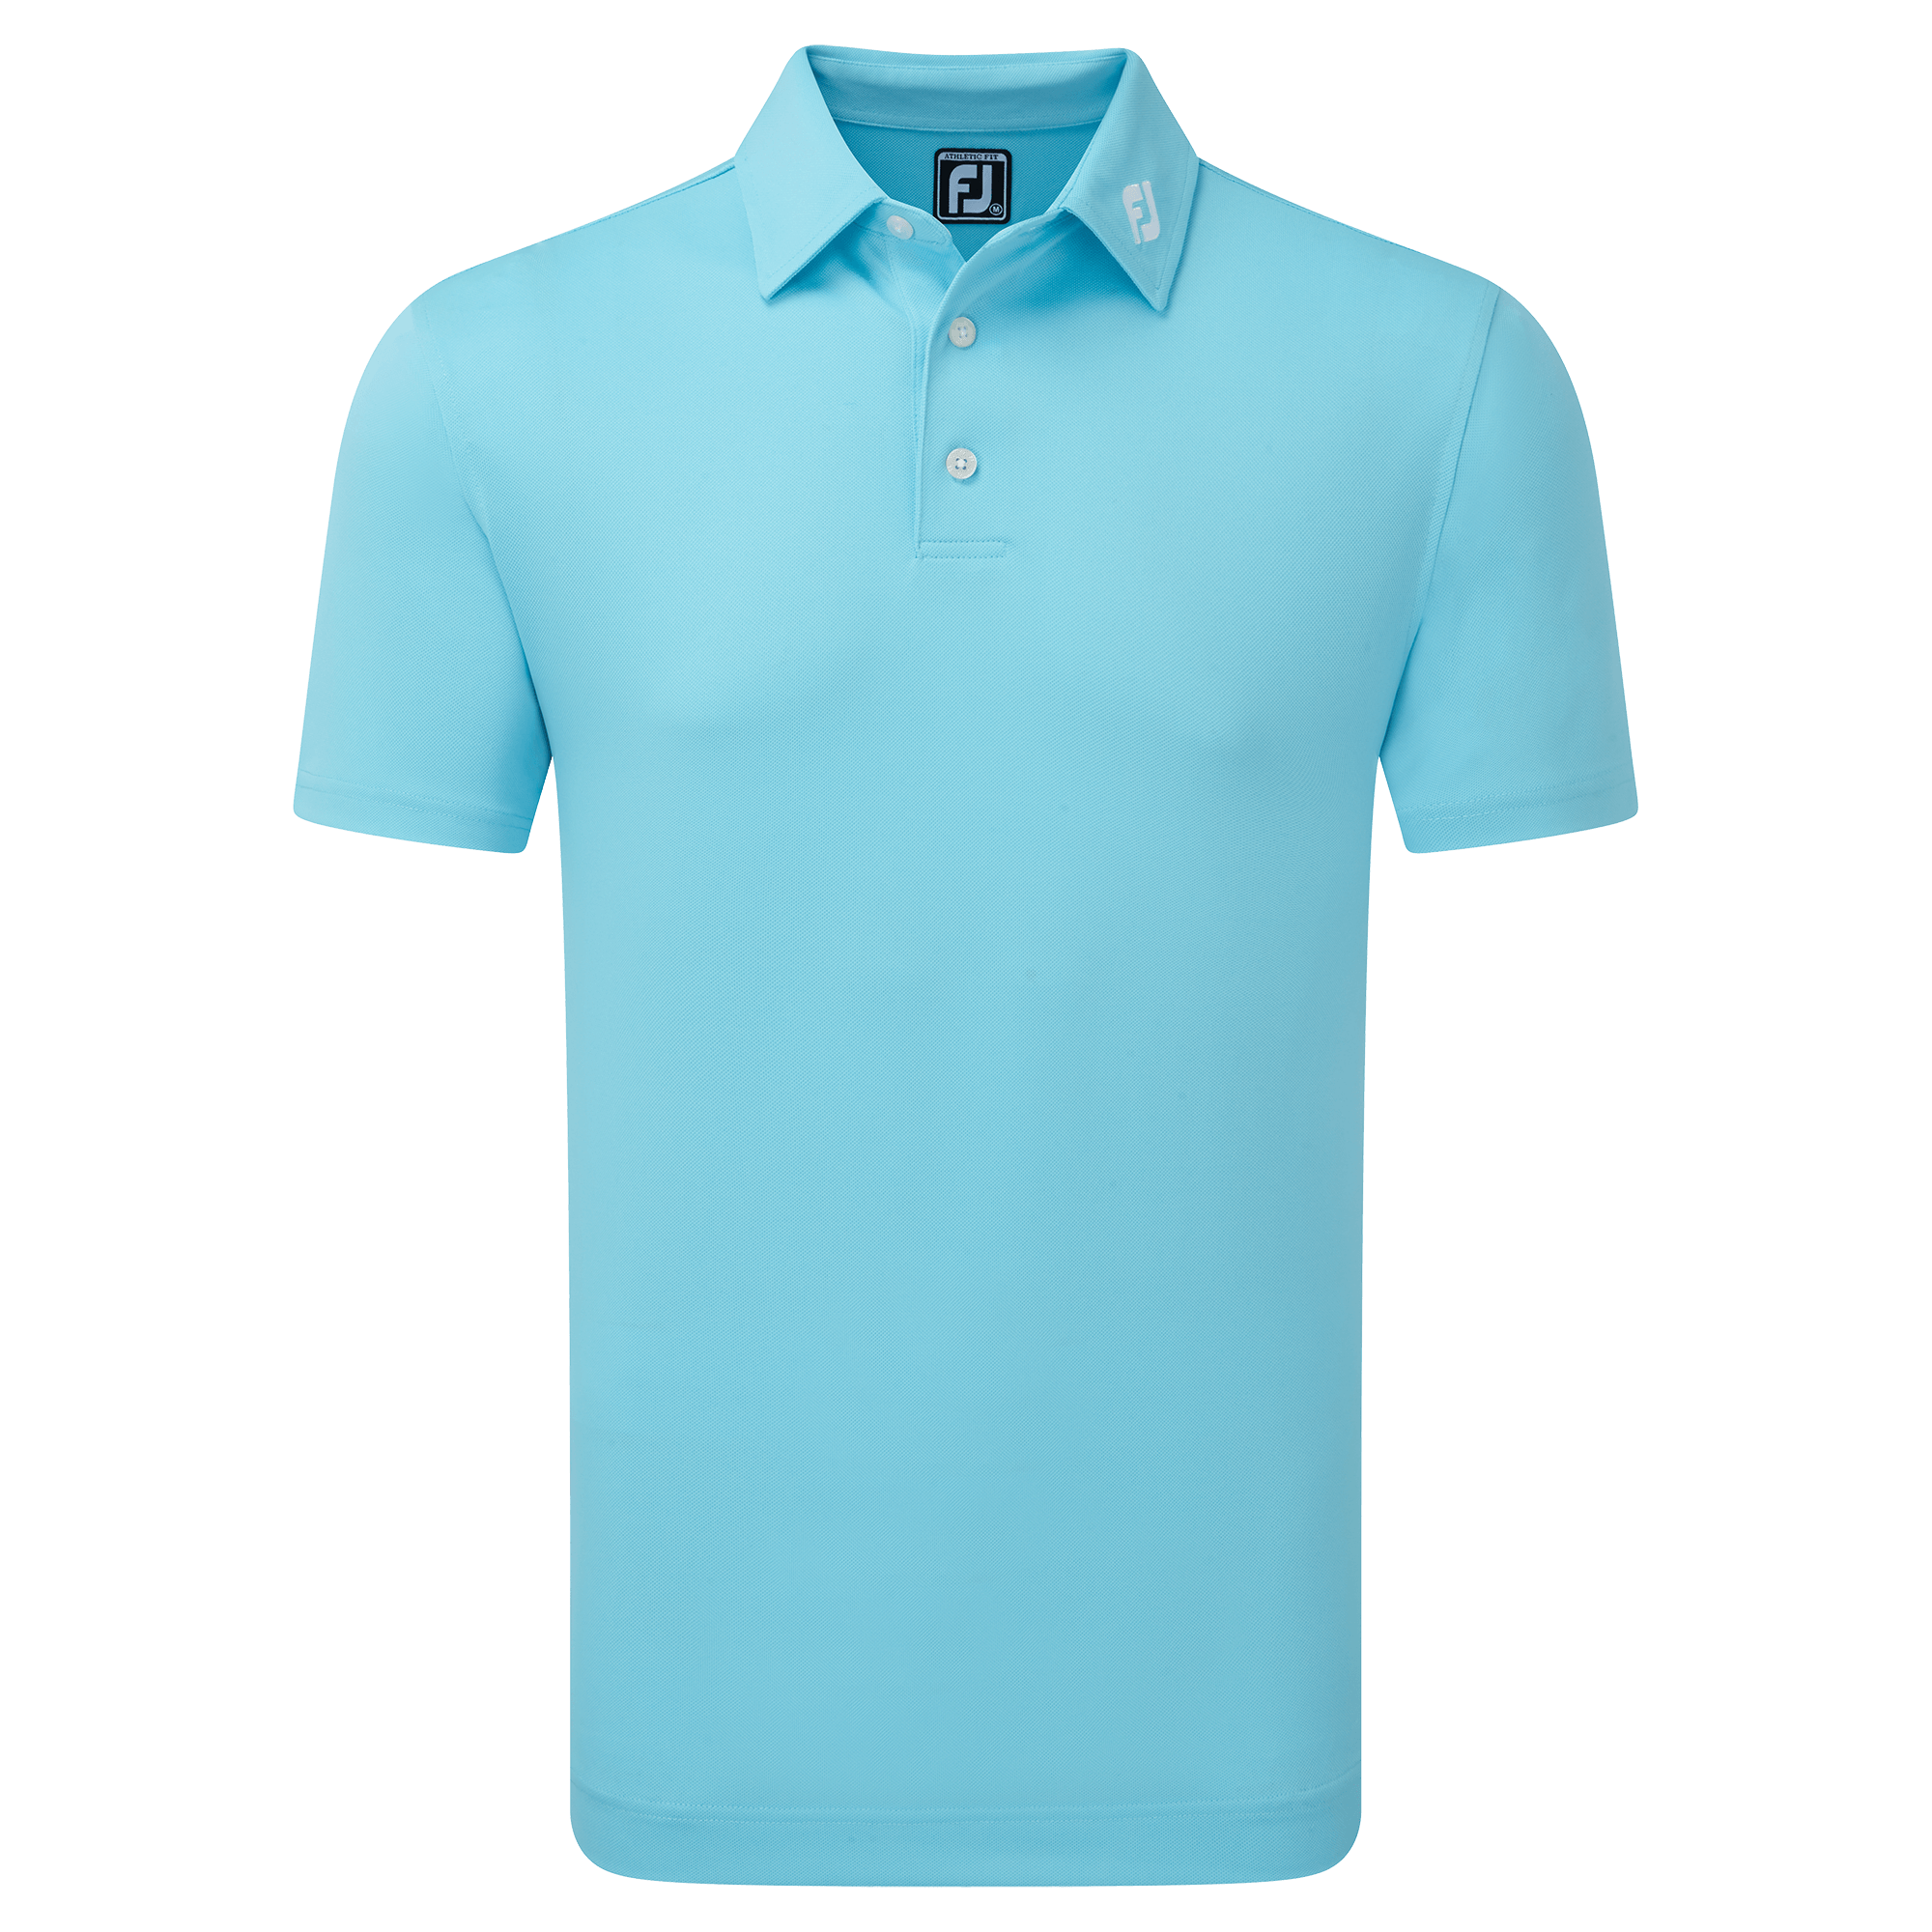 FootJoy Stretch Pique Solid Athletic Polo Shirt